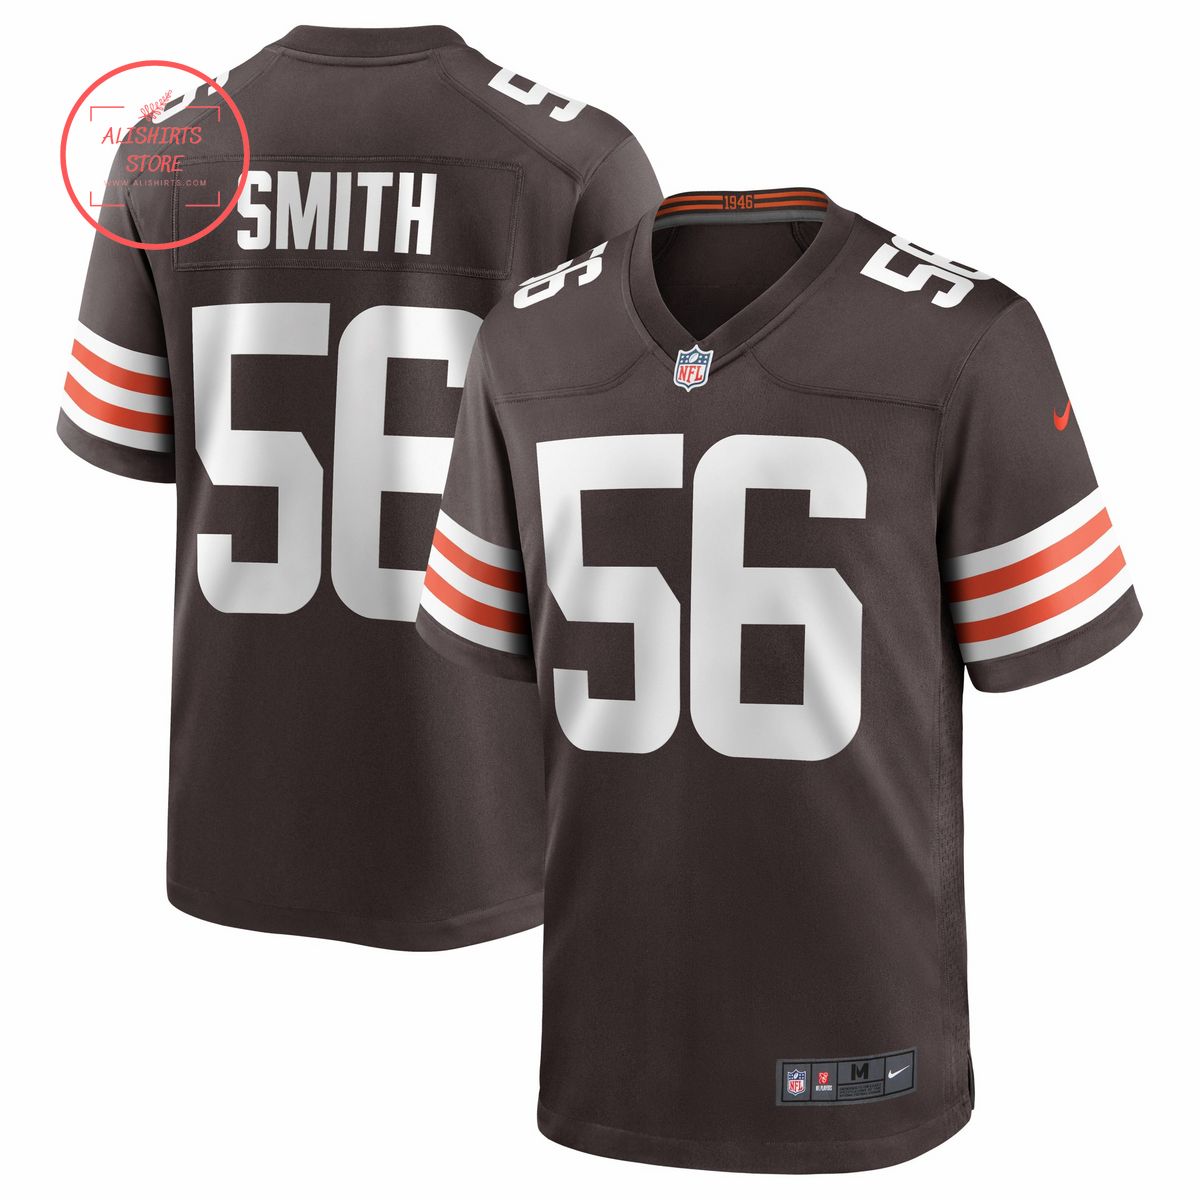 Malcolm Smith Cleveland Browns Nike Game Jersey